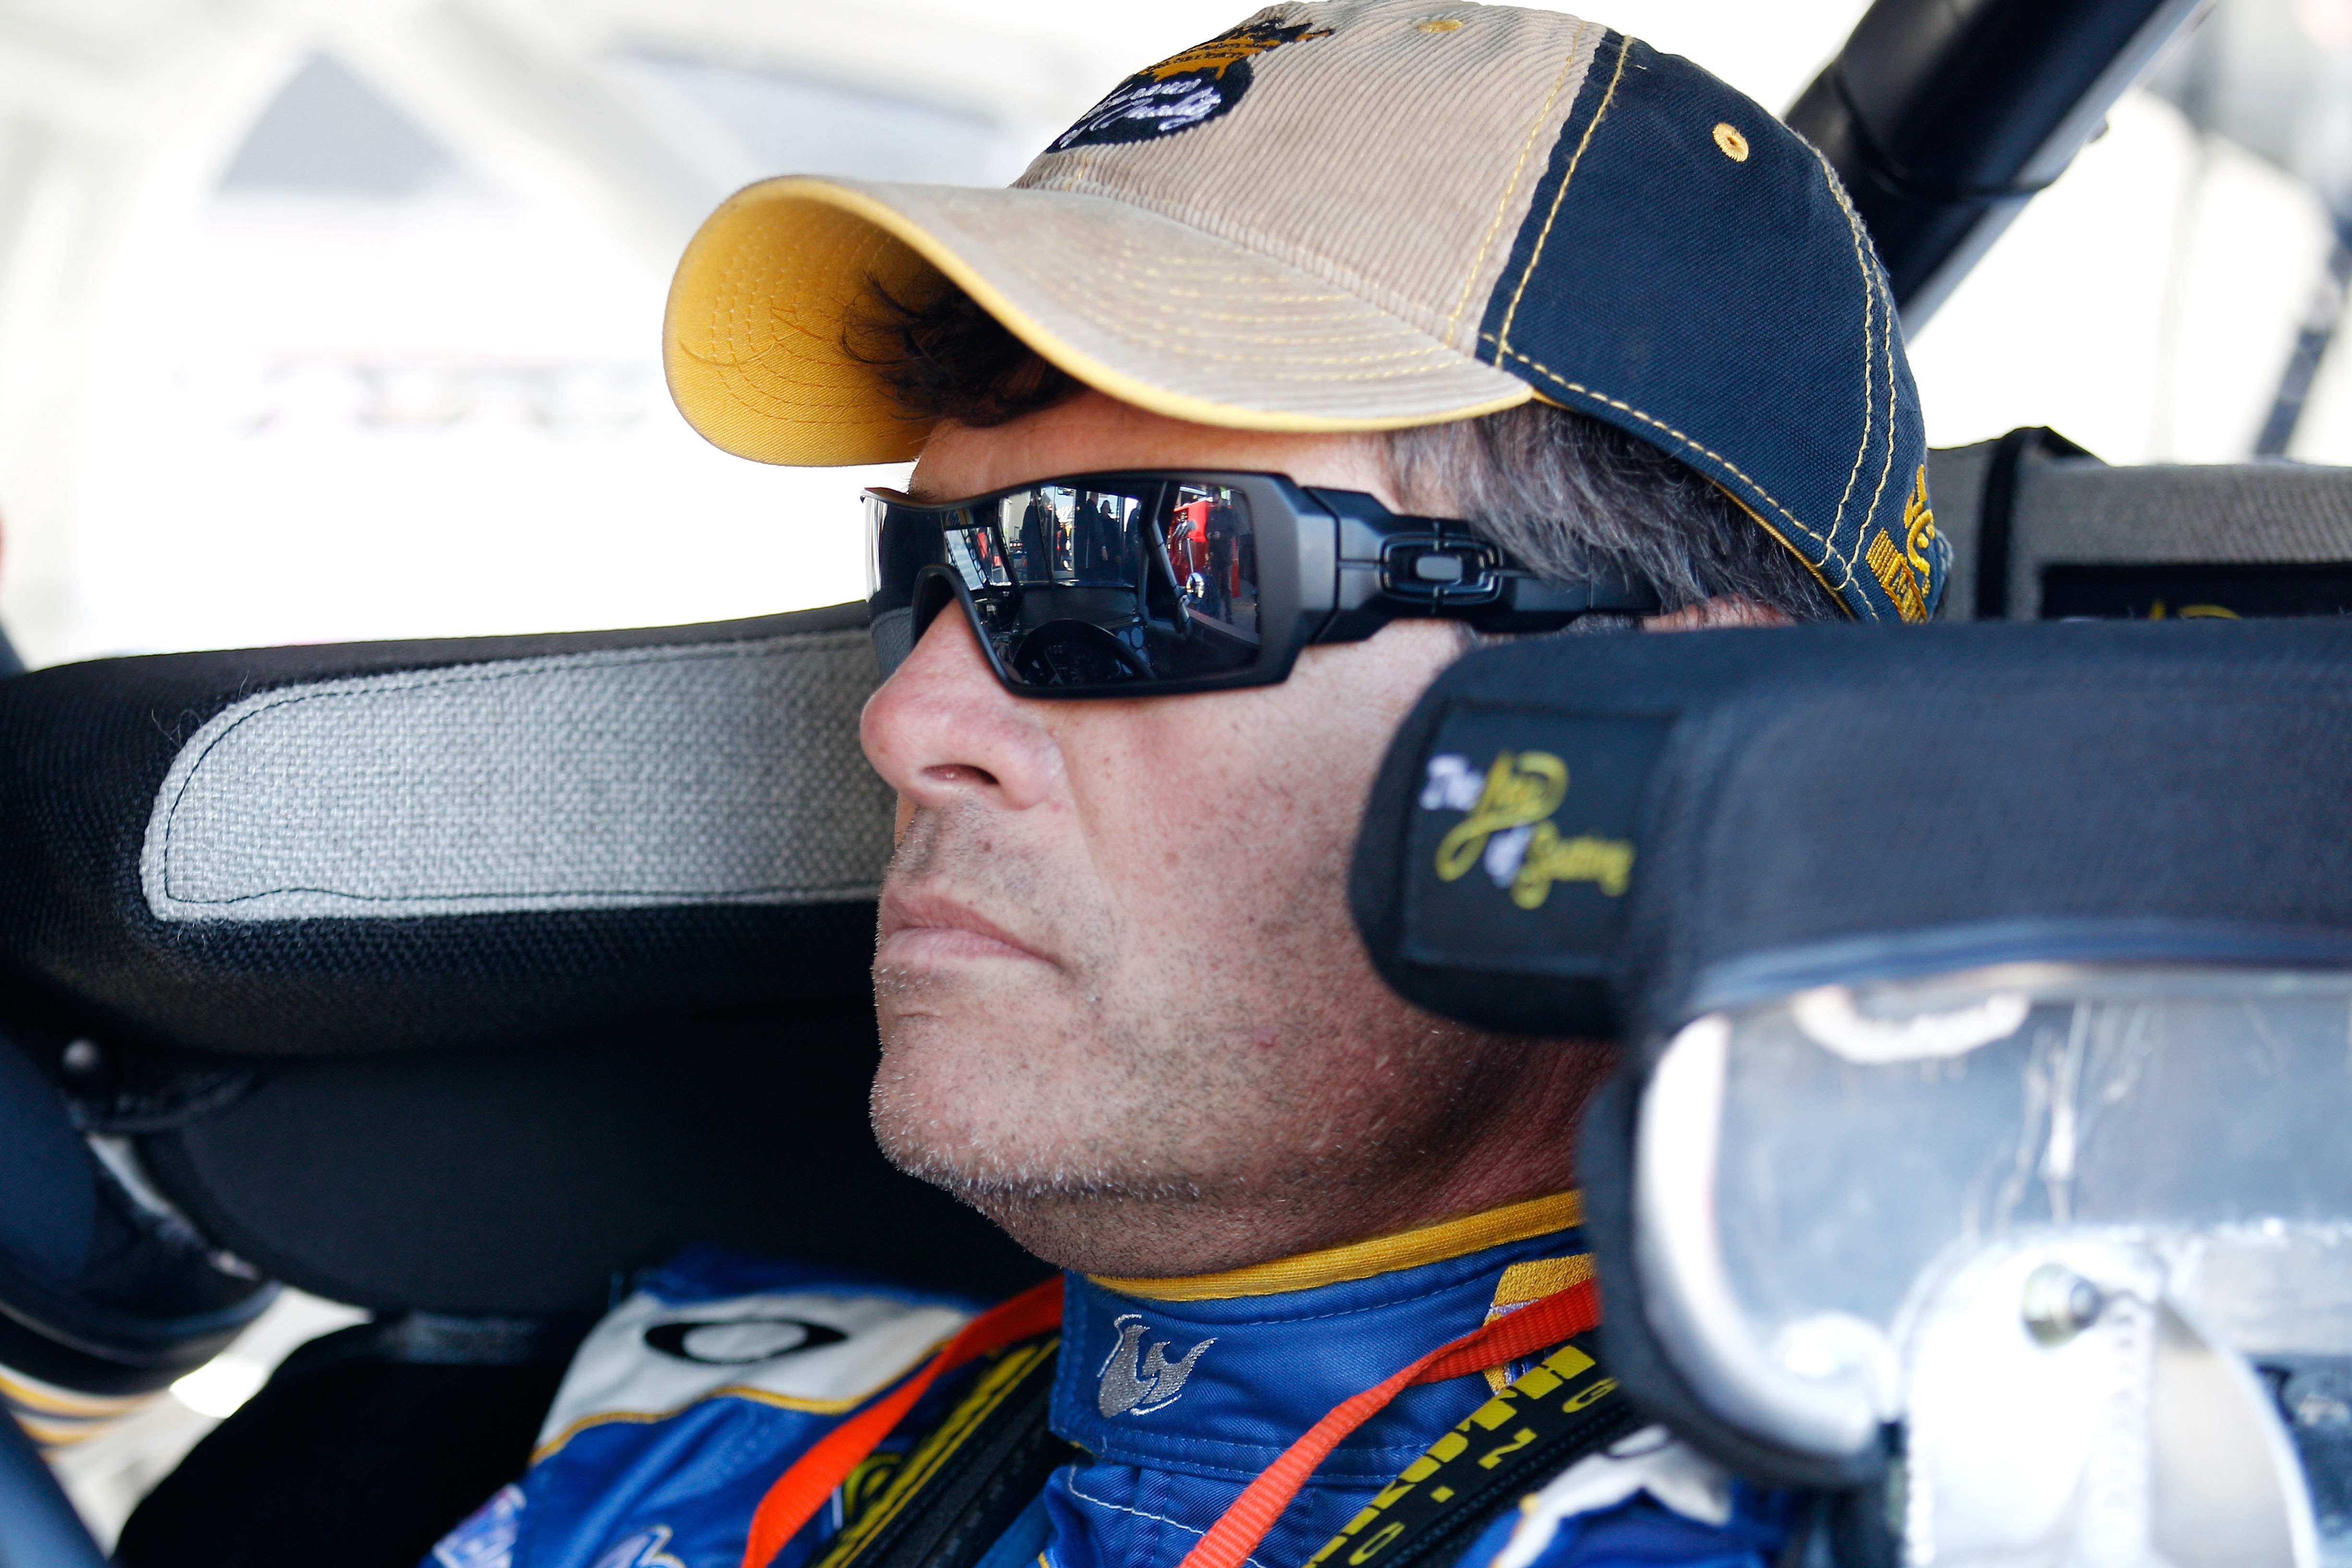 DAYTONA BEACH, FL - FEBRUARY 12:  Michael Waltrip, driver of the #15 NAPA Toyota, sits in his car during practice for the NASCAR Sprint Cup Series Daytona 500 at Daytona International Speedway on February 12, 2011 in Daytona Beach, Florida.  (Photo by Chr